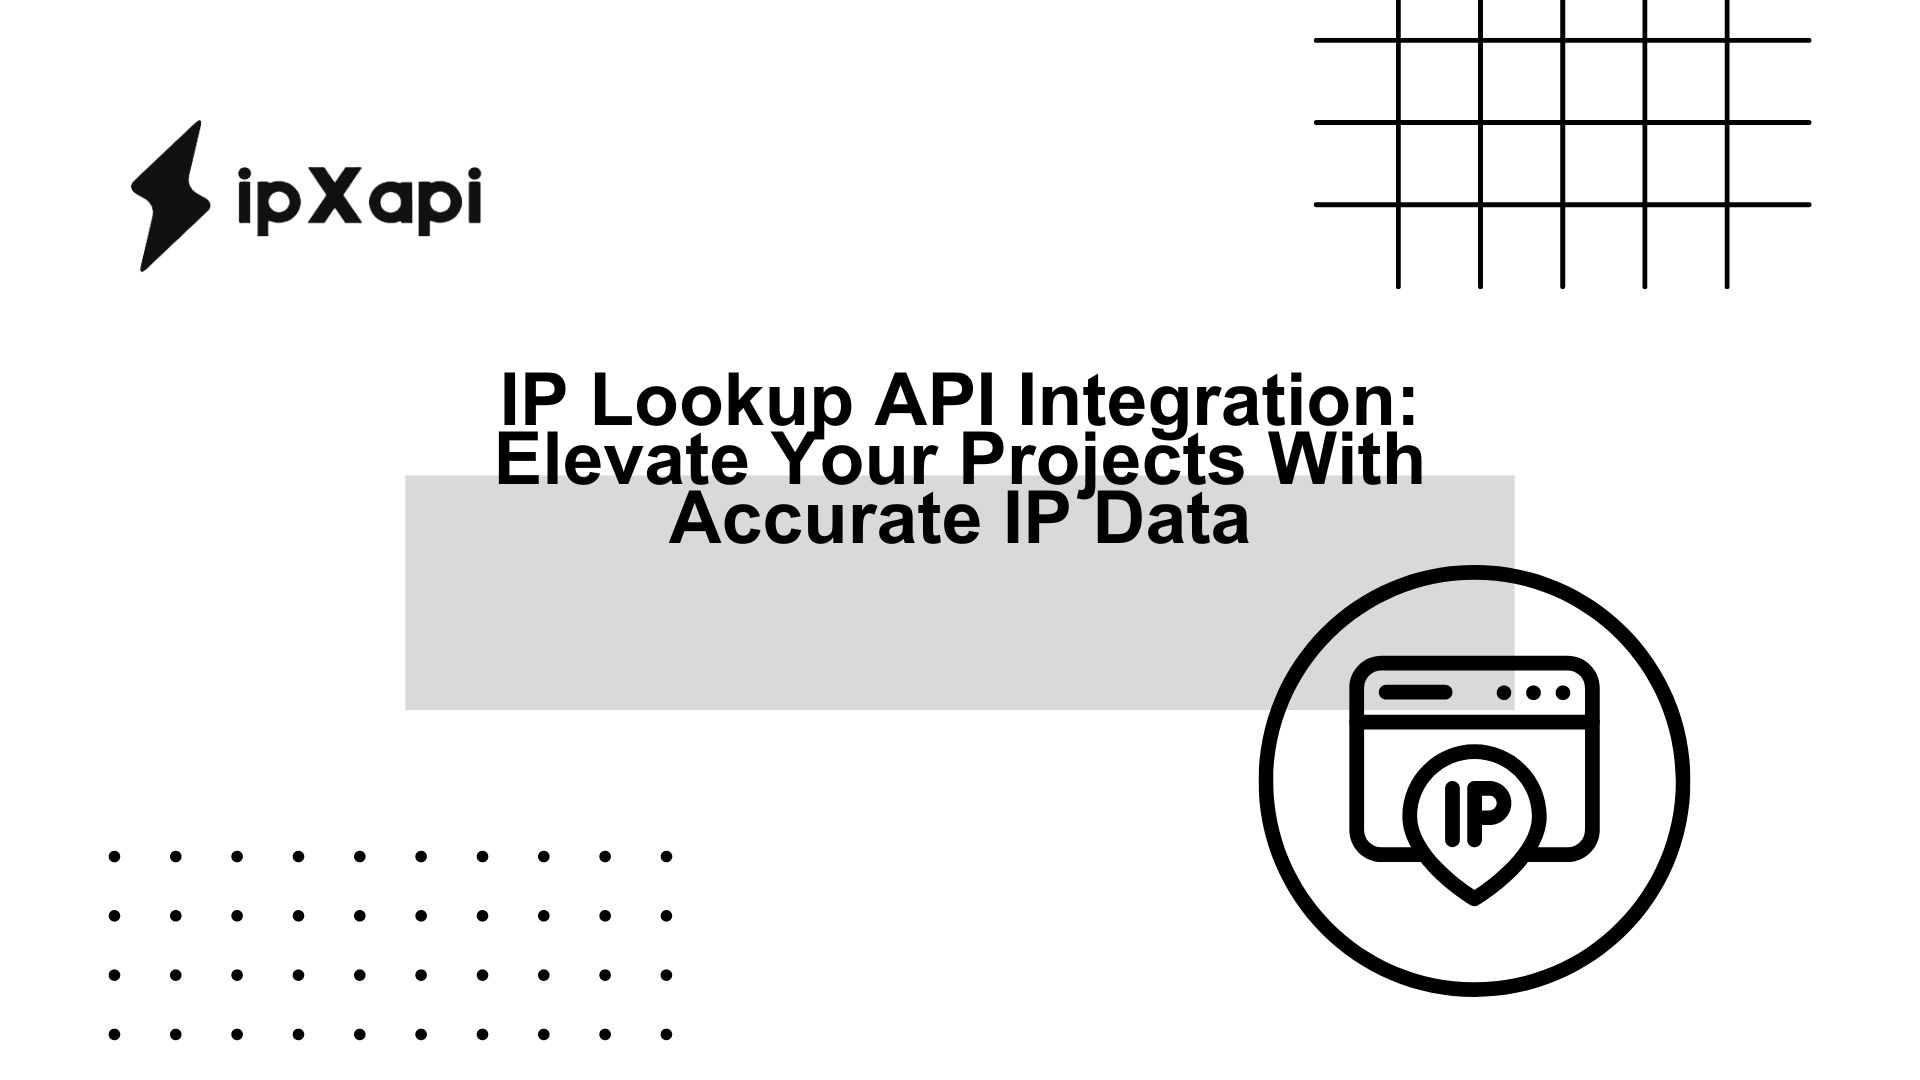 IP Lookup API Integration: Elevate Your Projects With Accurate IP Data